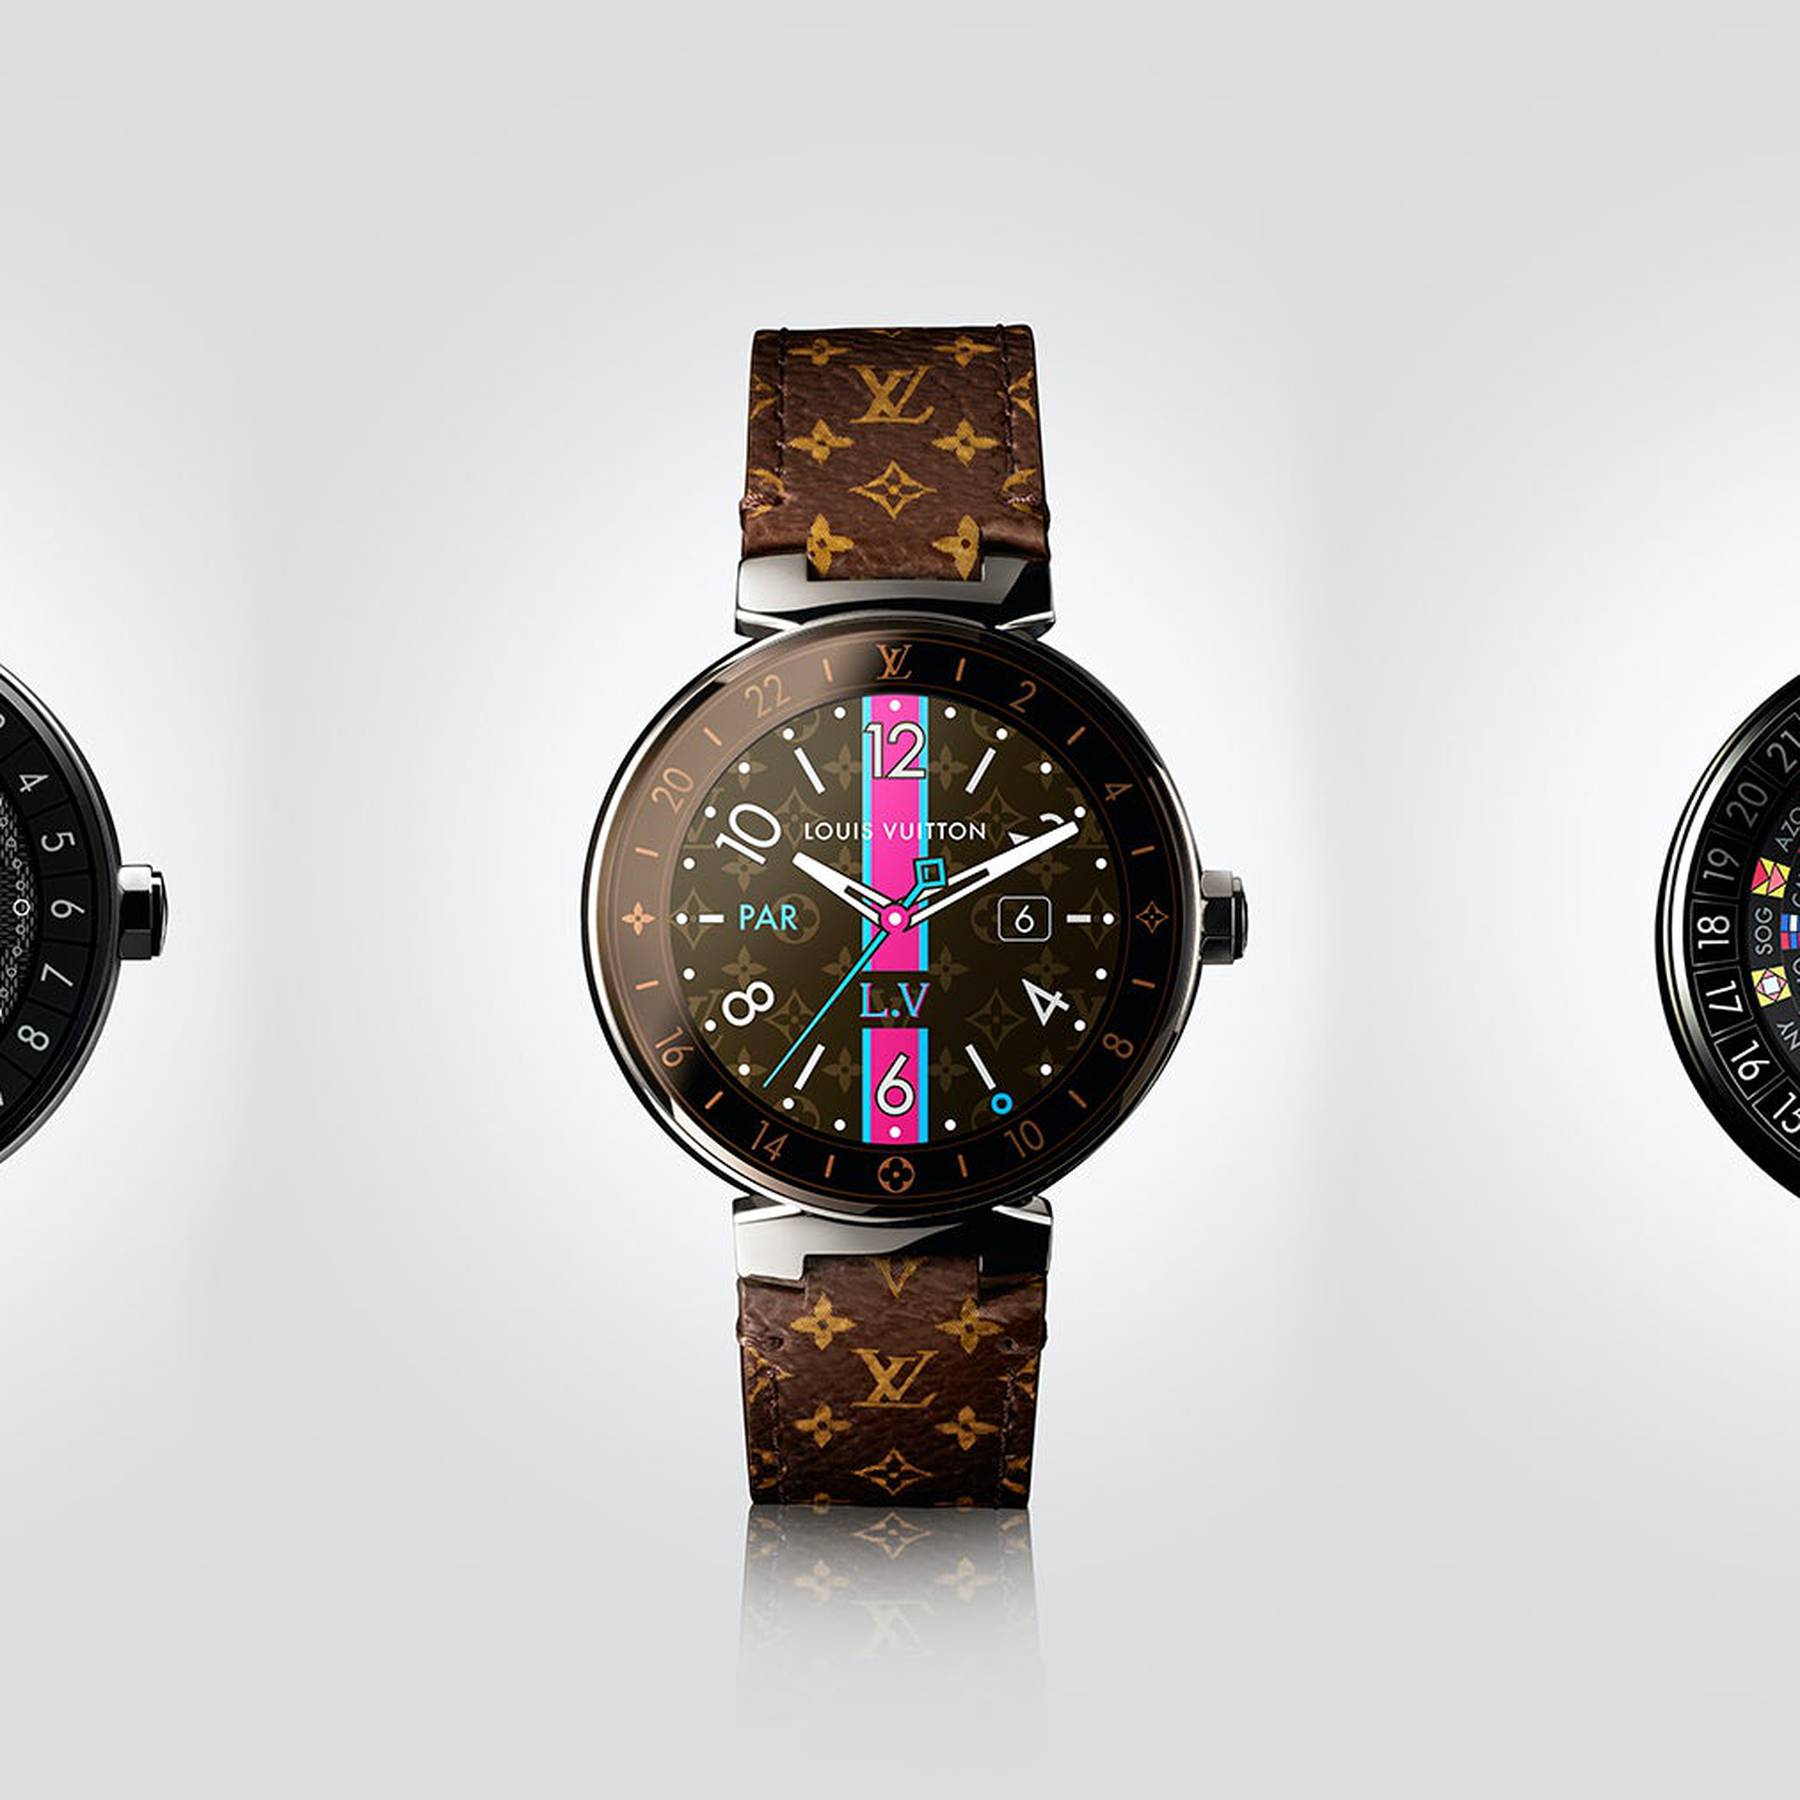 Louis Vuitton launches first connected watch, Tambour Horizon - LVMH